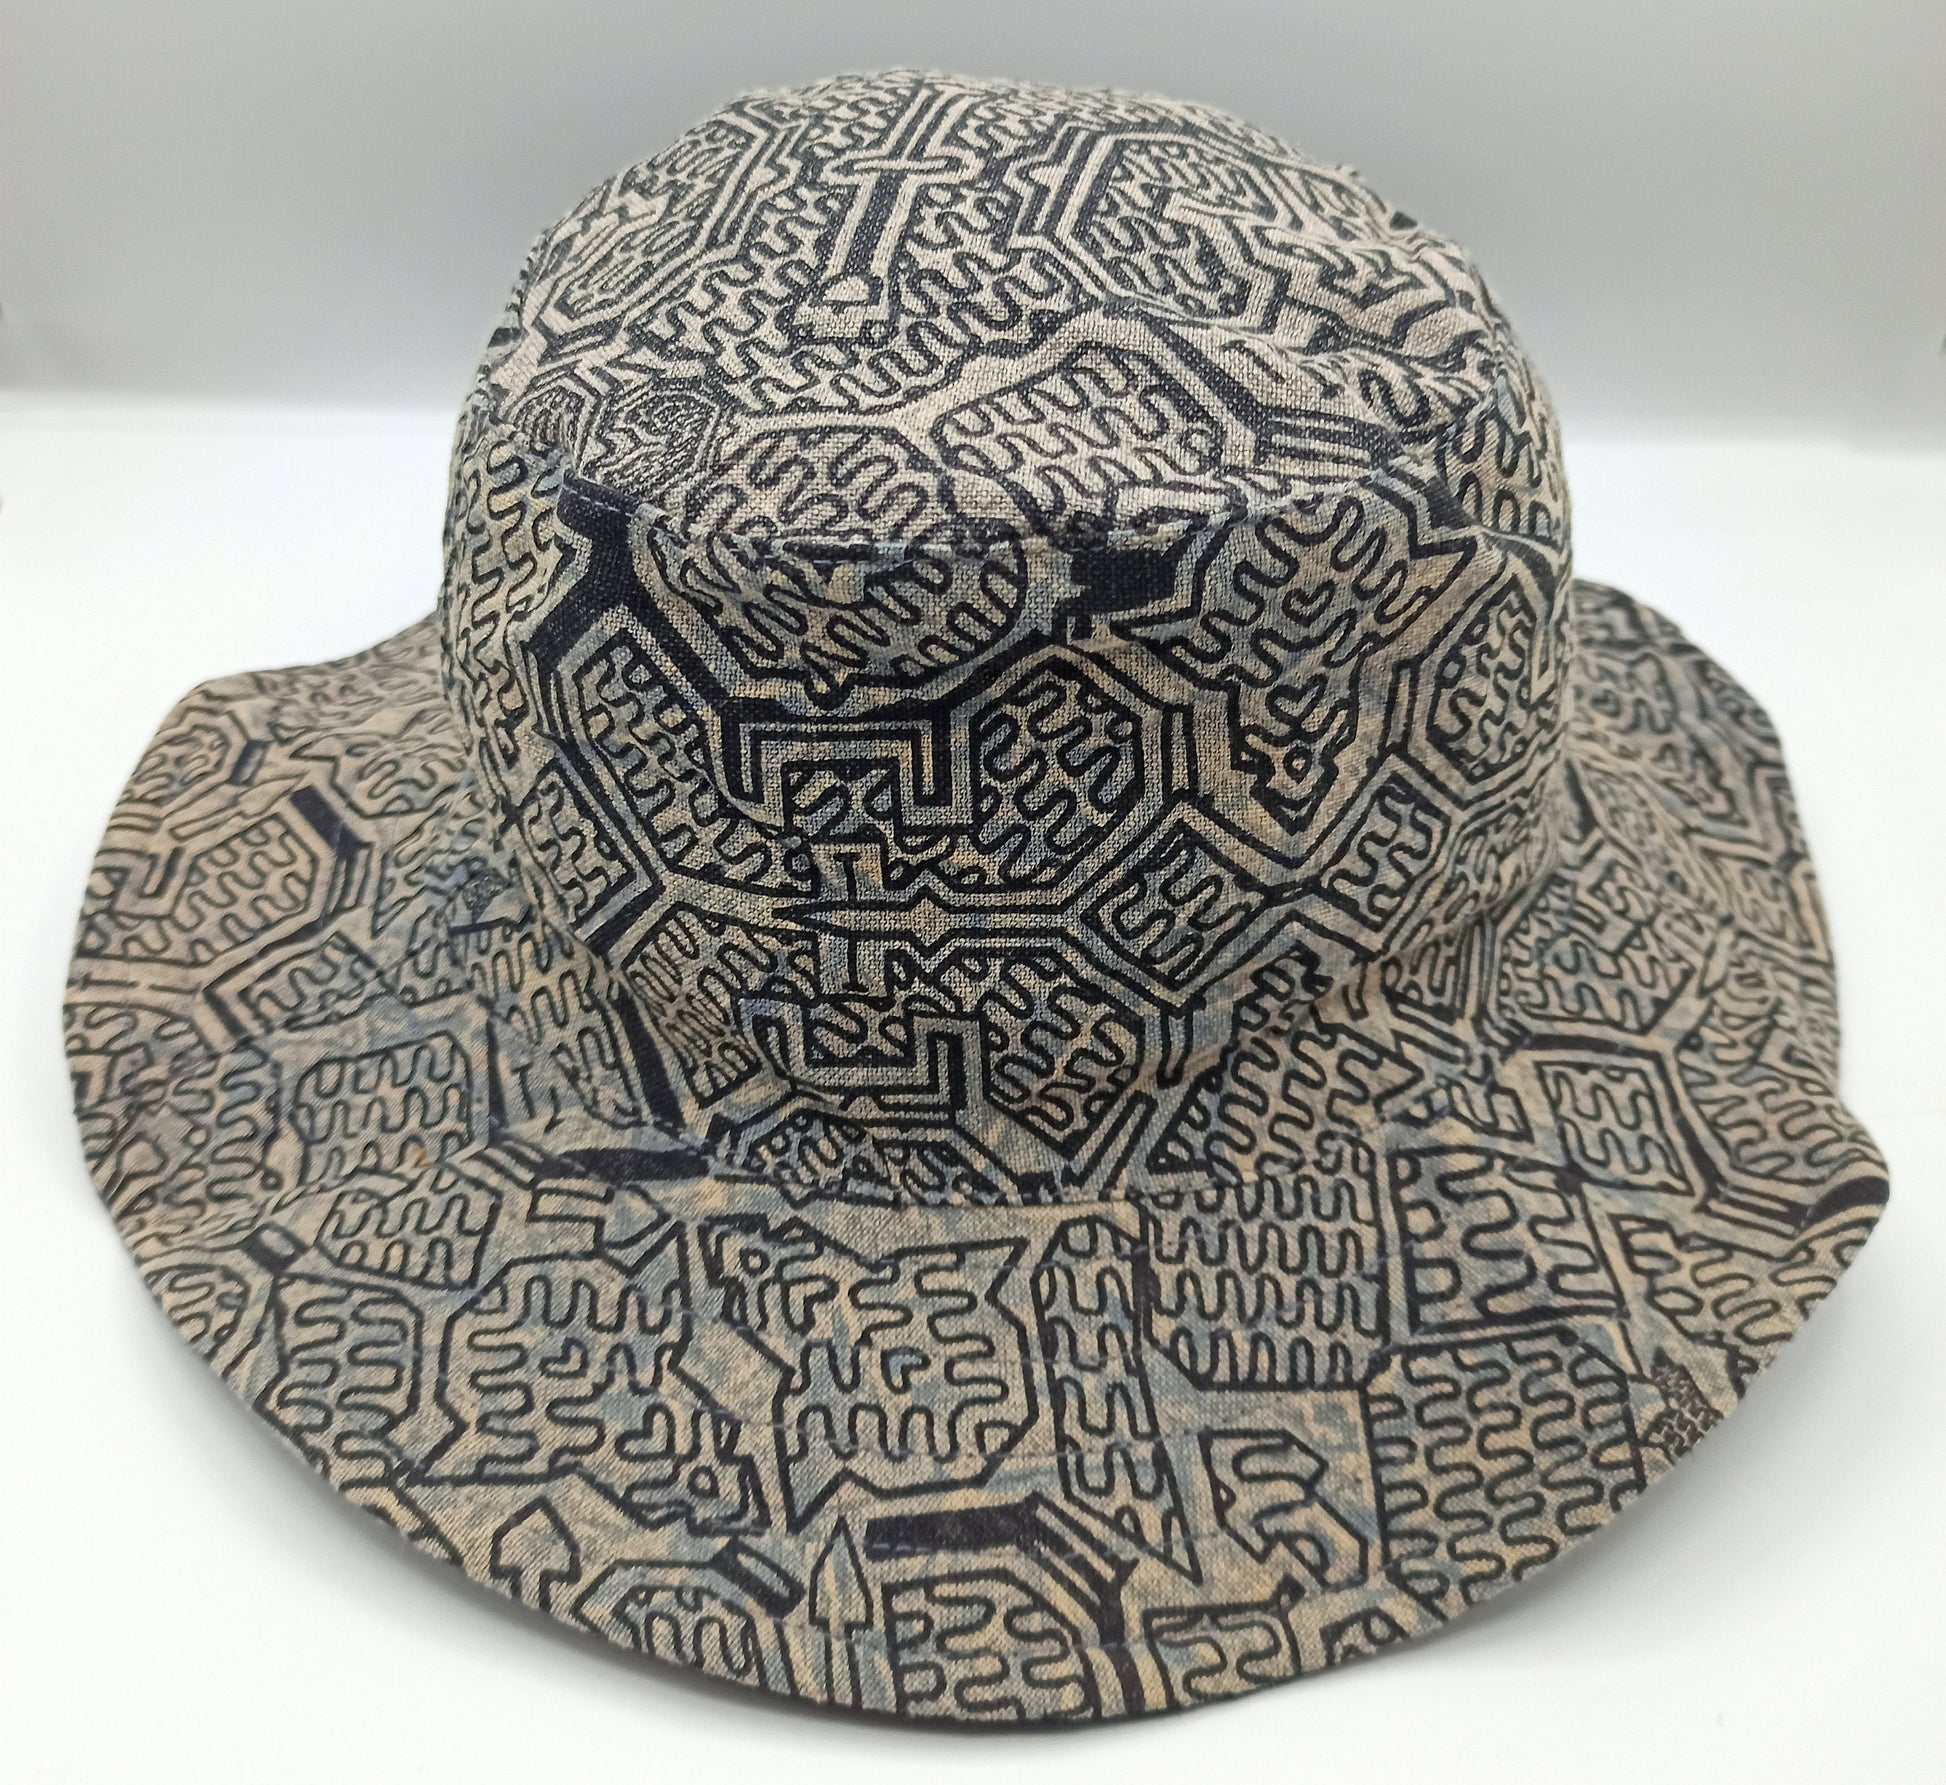 Gray Ayahuasca Hat Shipibo Conibo Patterns with secret inside pocket light and comfortable sunshine protection DMT psychedelic gear Cap